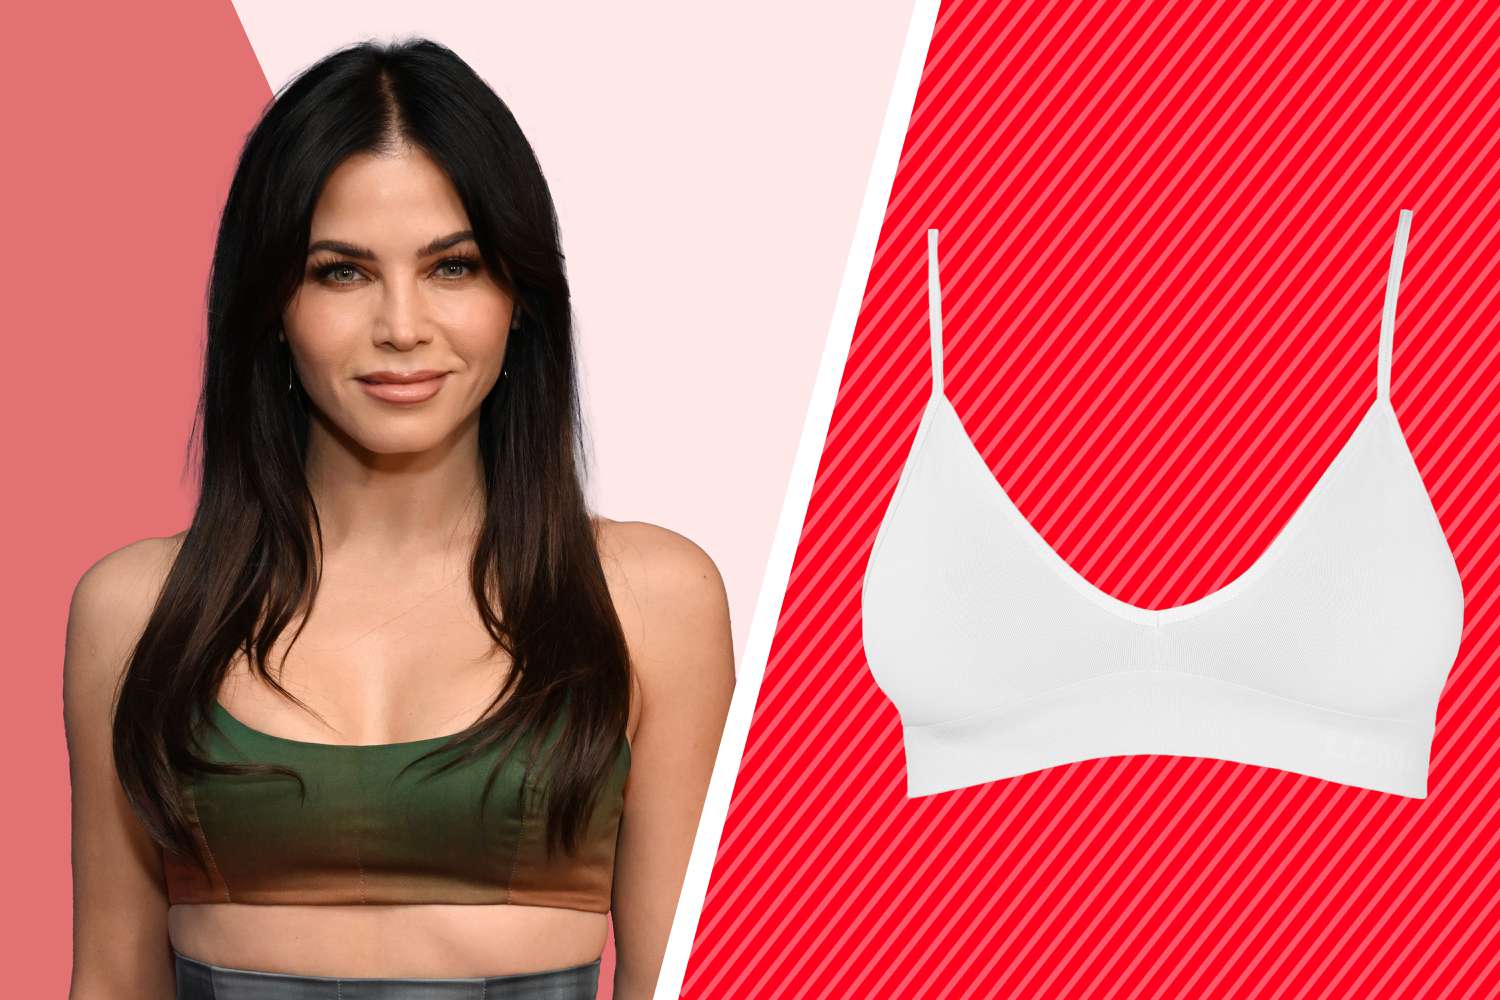 Jenna Dewan Repeatedly Wears This $50 Bra That’s My Go-To for Lounging at Home and Pilates